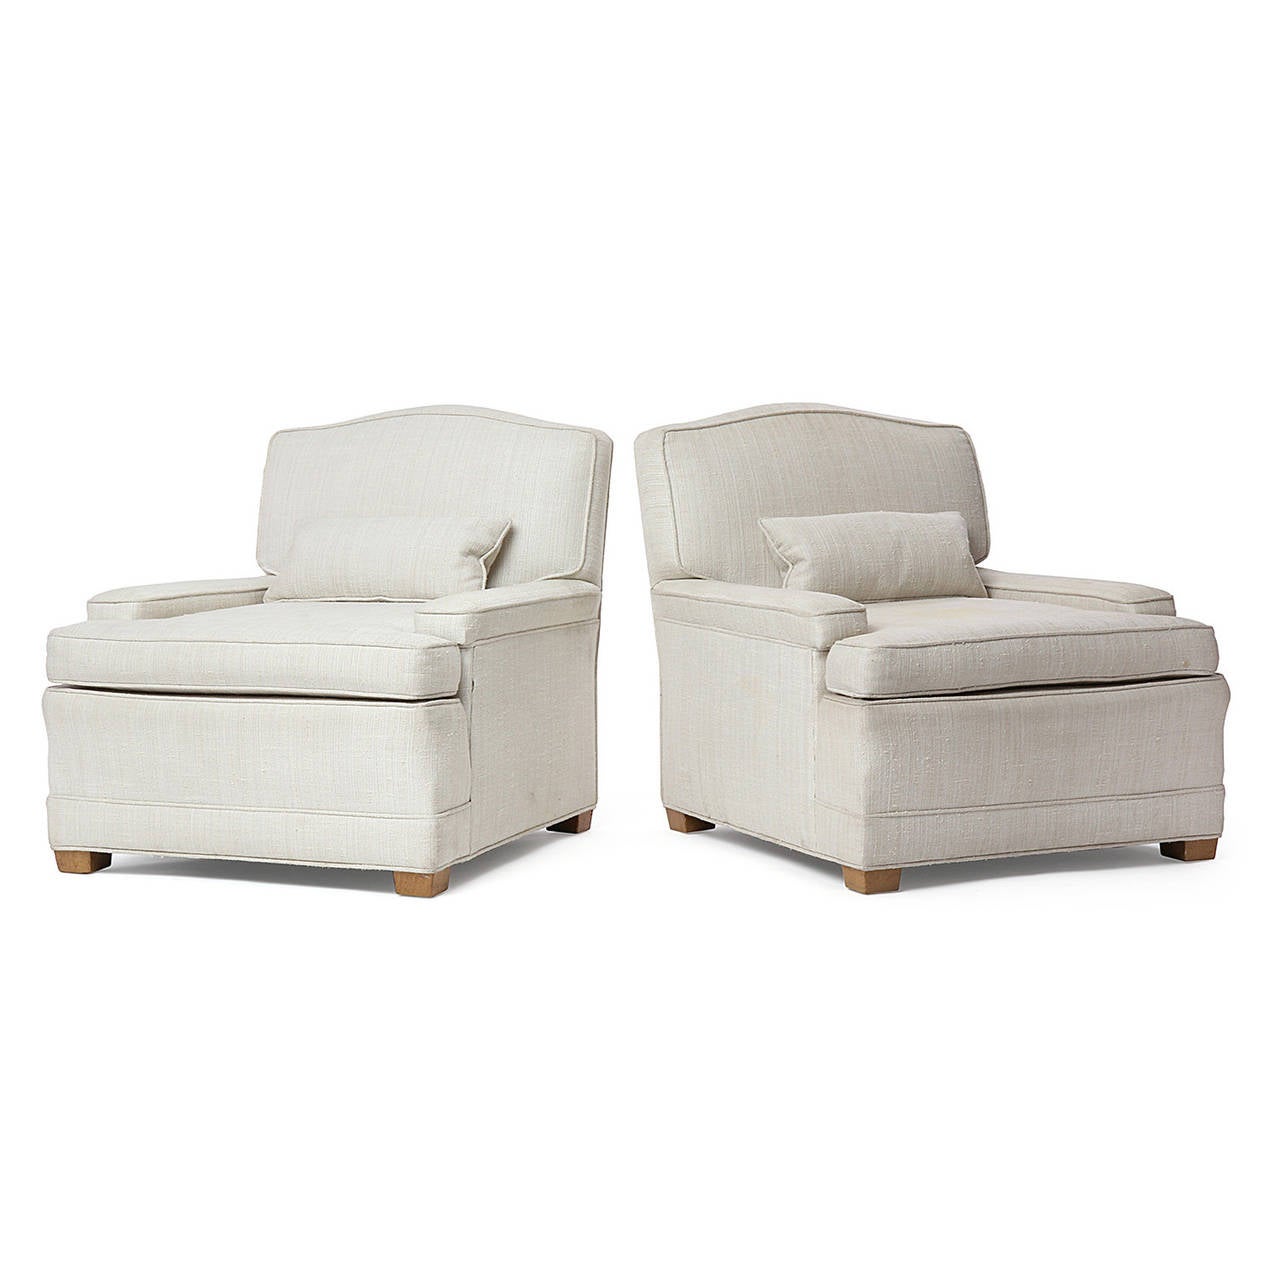 A finely crafted and generously scaled pair of scroll-top upholstered lounge chairs having sculptural bodies with distinctive shortened arms resting on squared pale walnut feet.